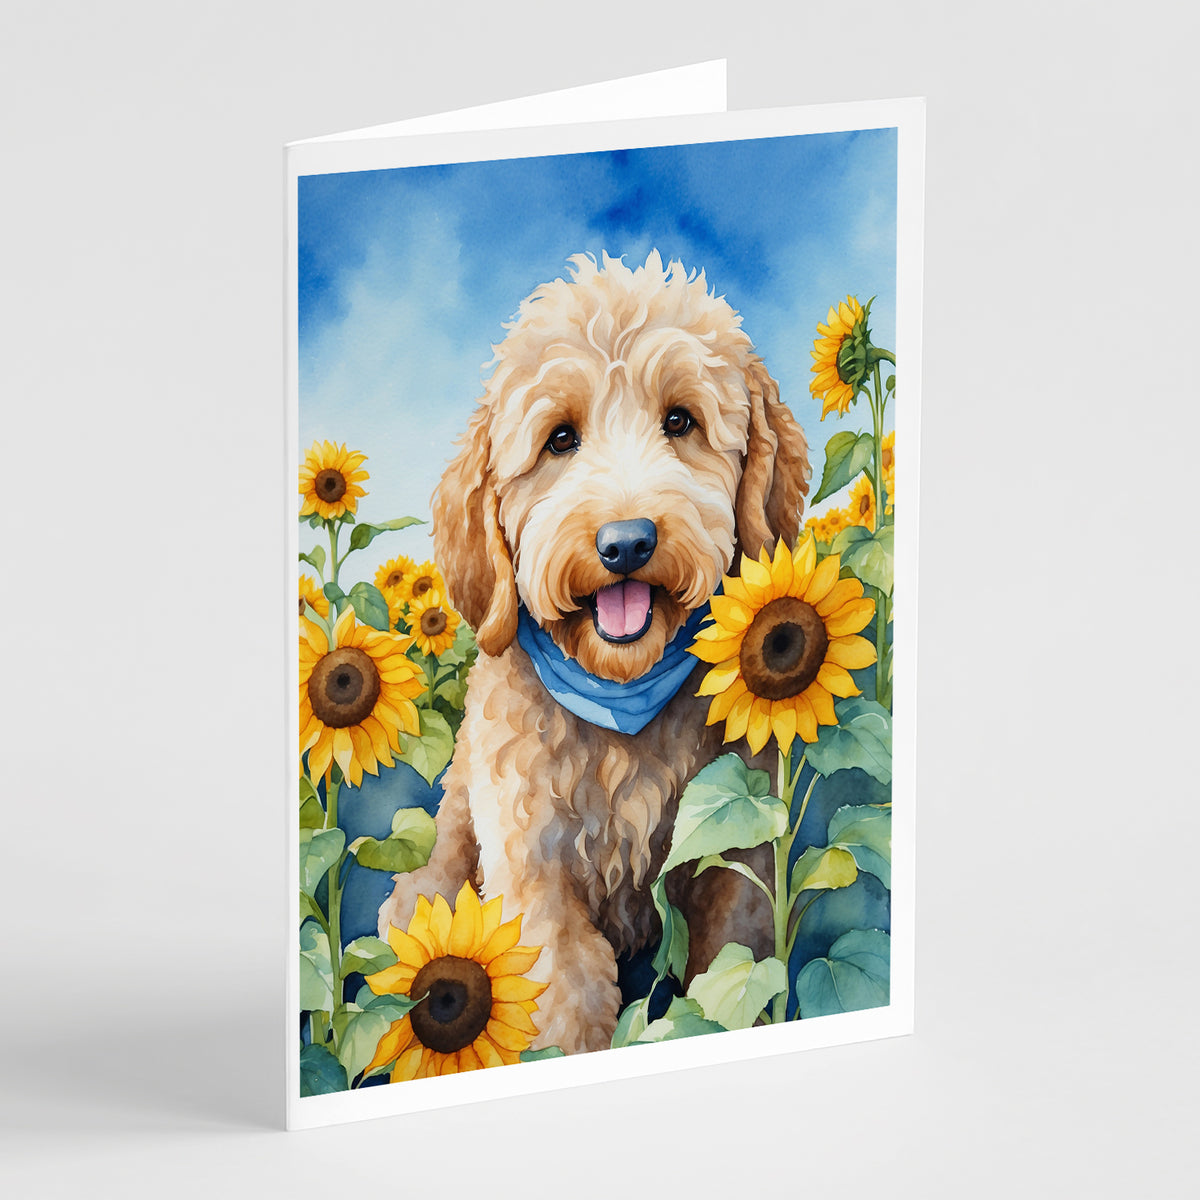 Buy this Goldendoodle in Sunflowers Greeting Cards Pack of 8